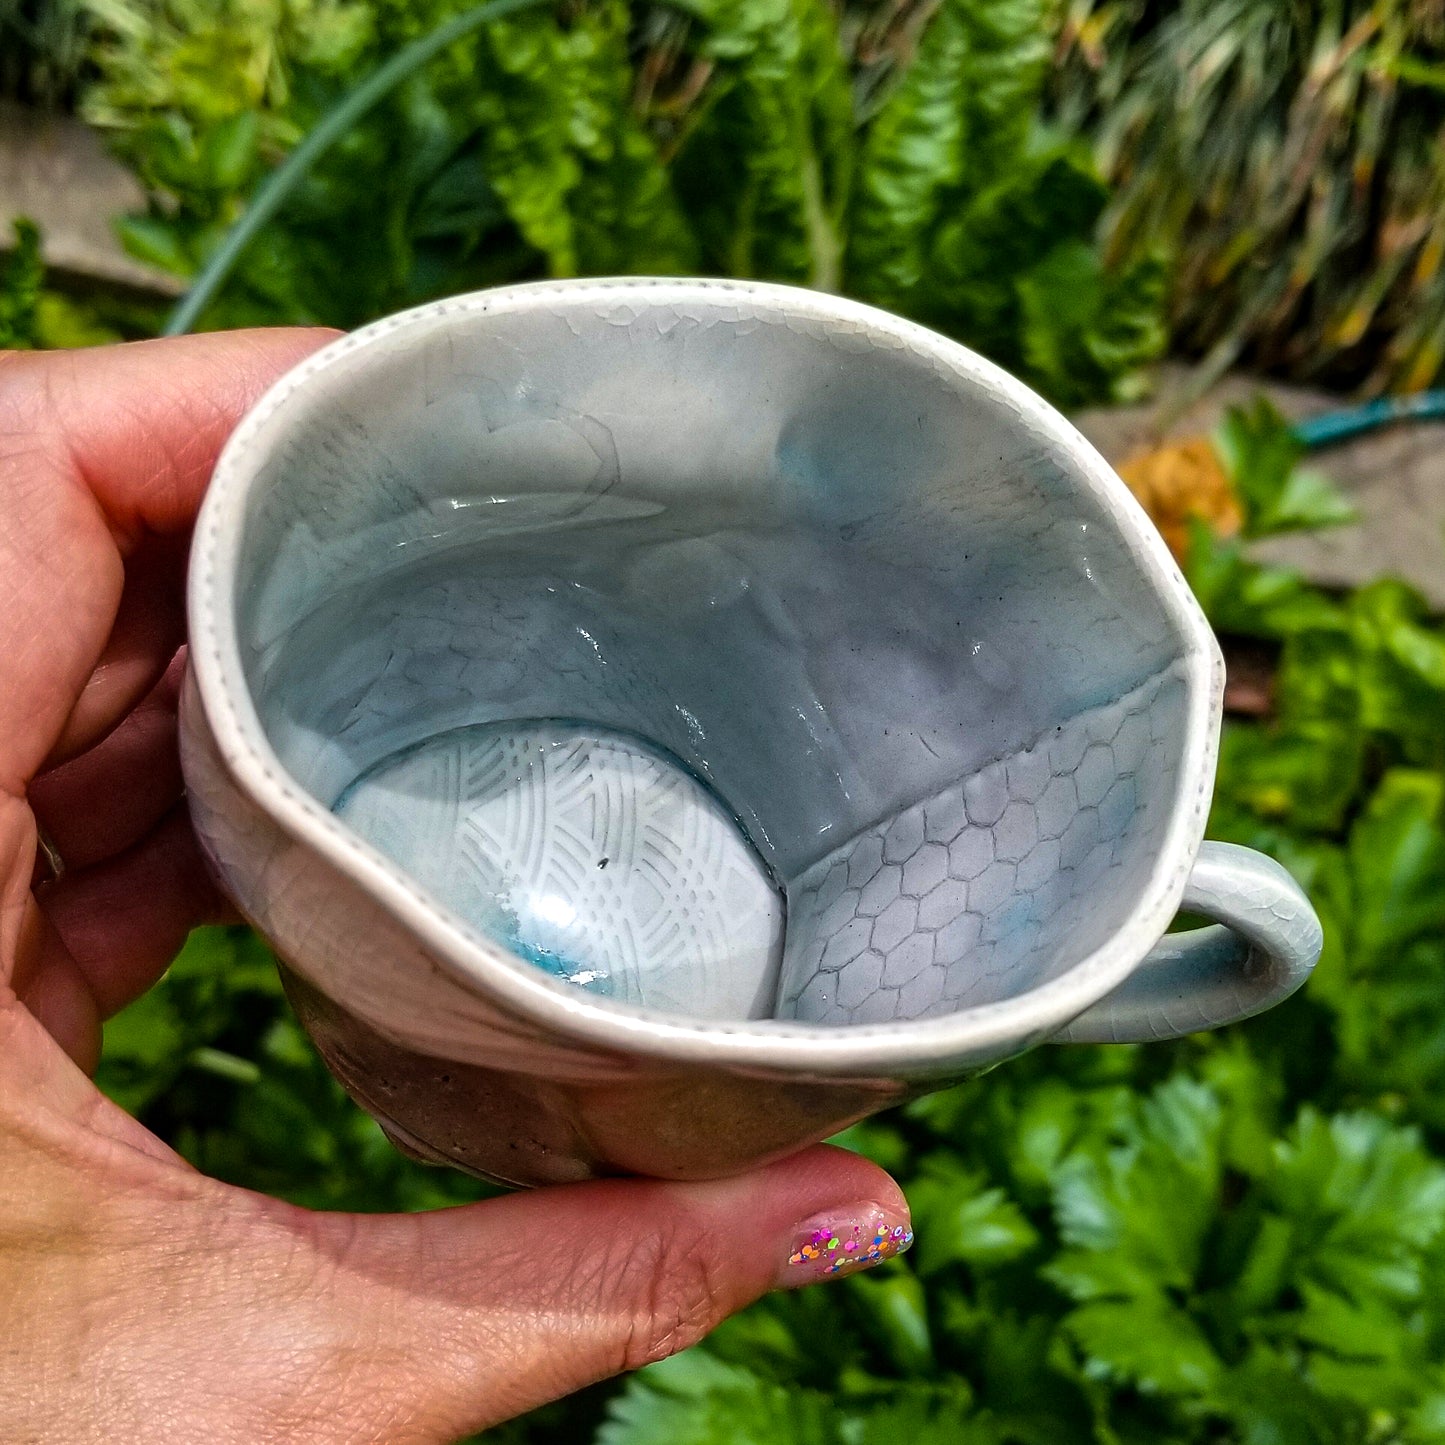 Inside detail of handmade stoneware ceramic soda fired mug blue color with pressed textures